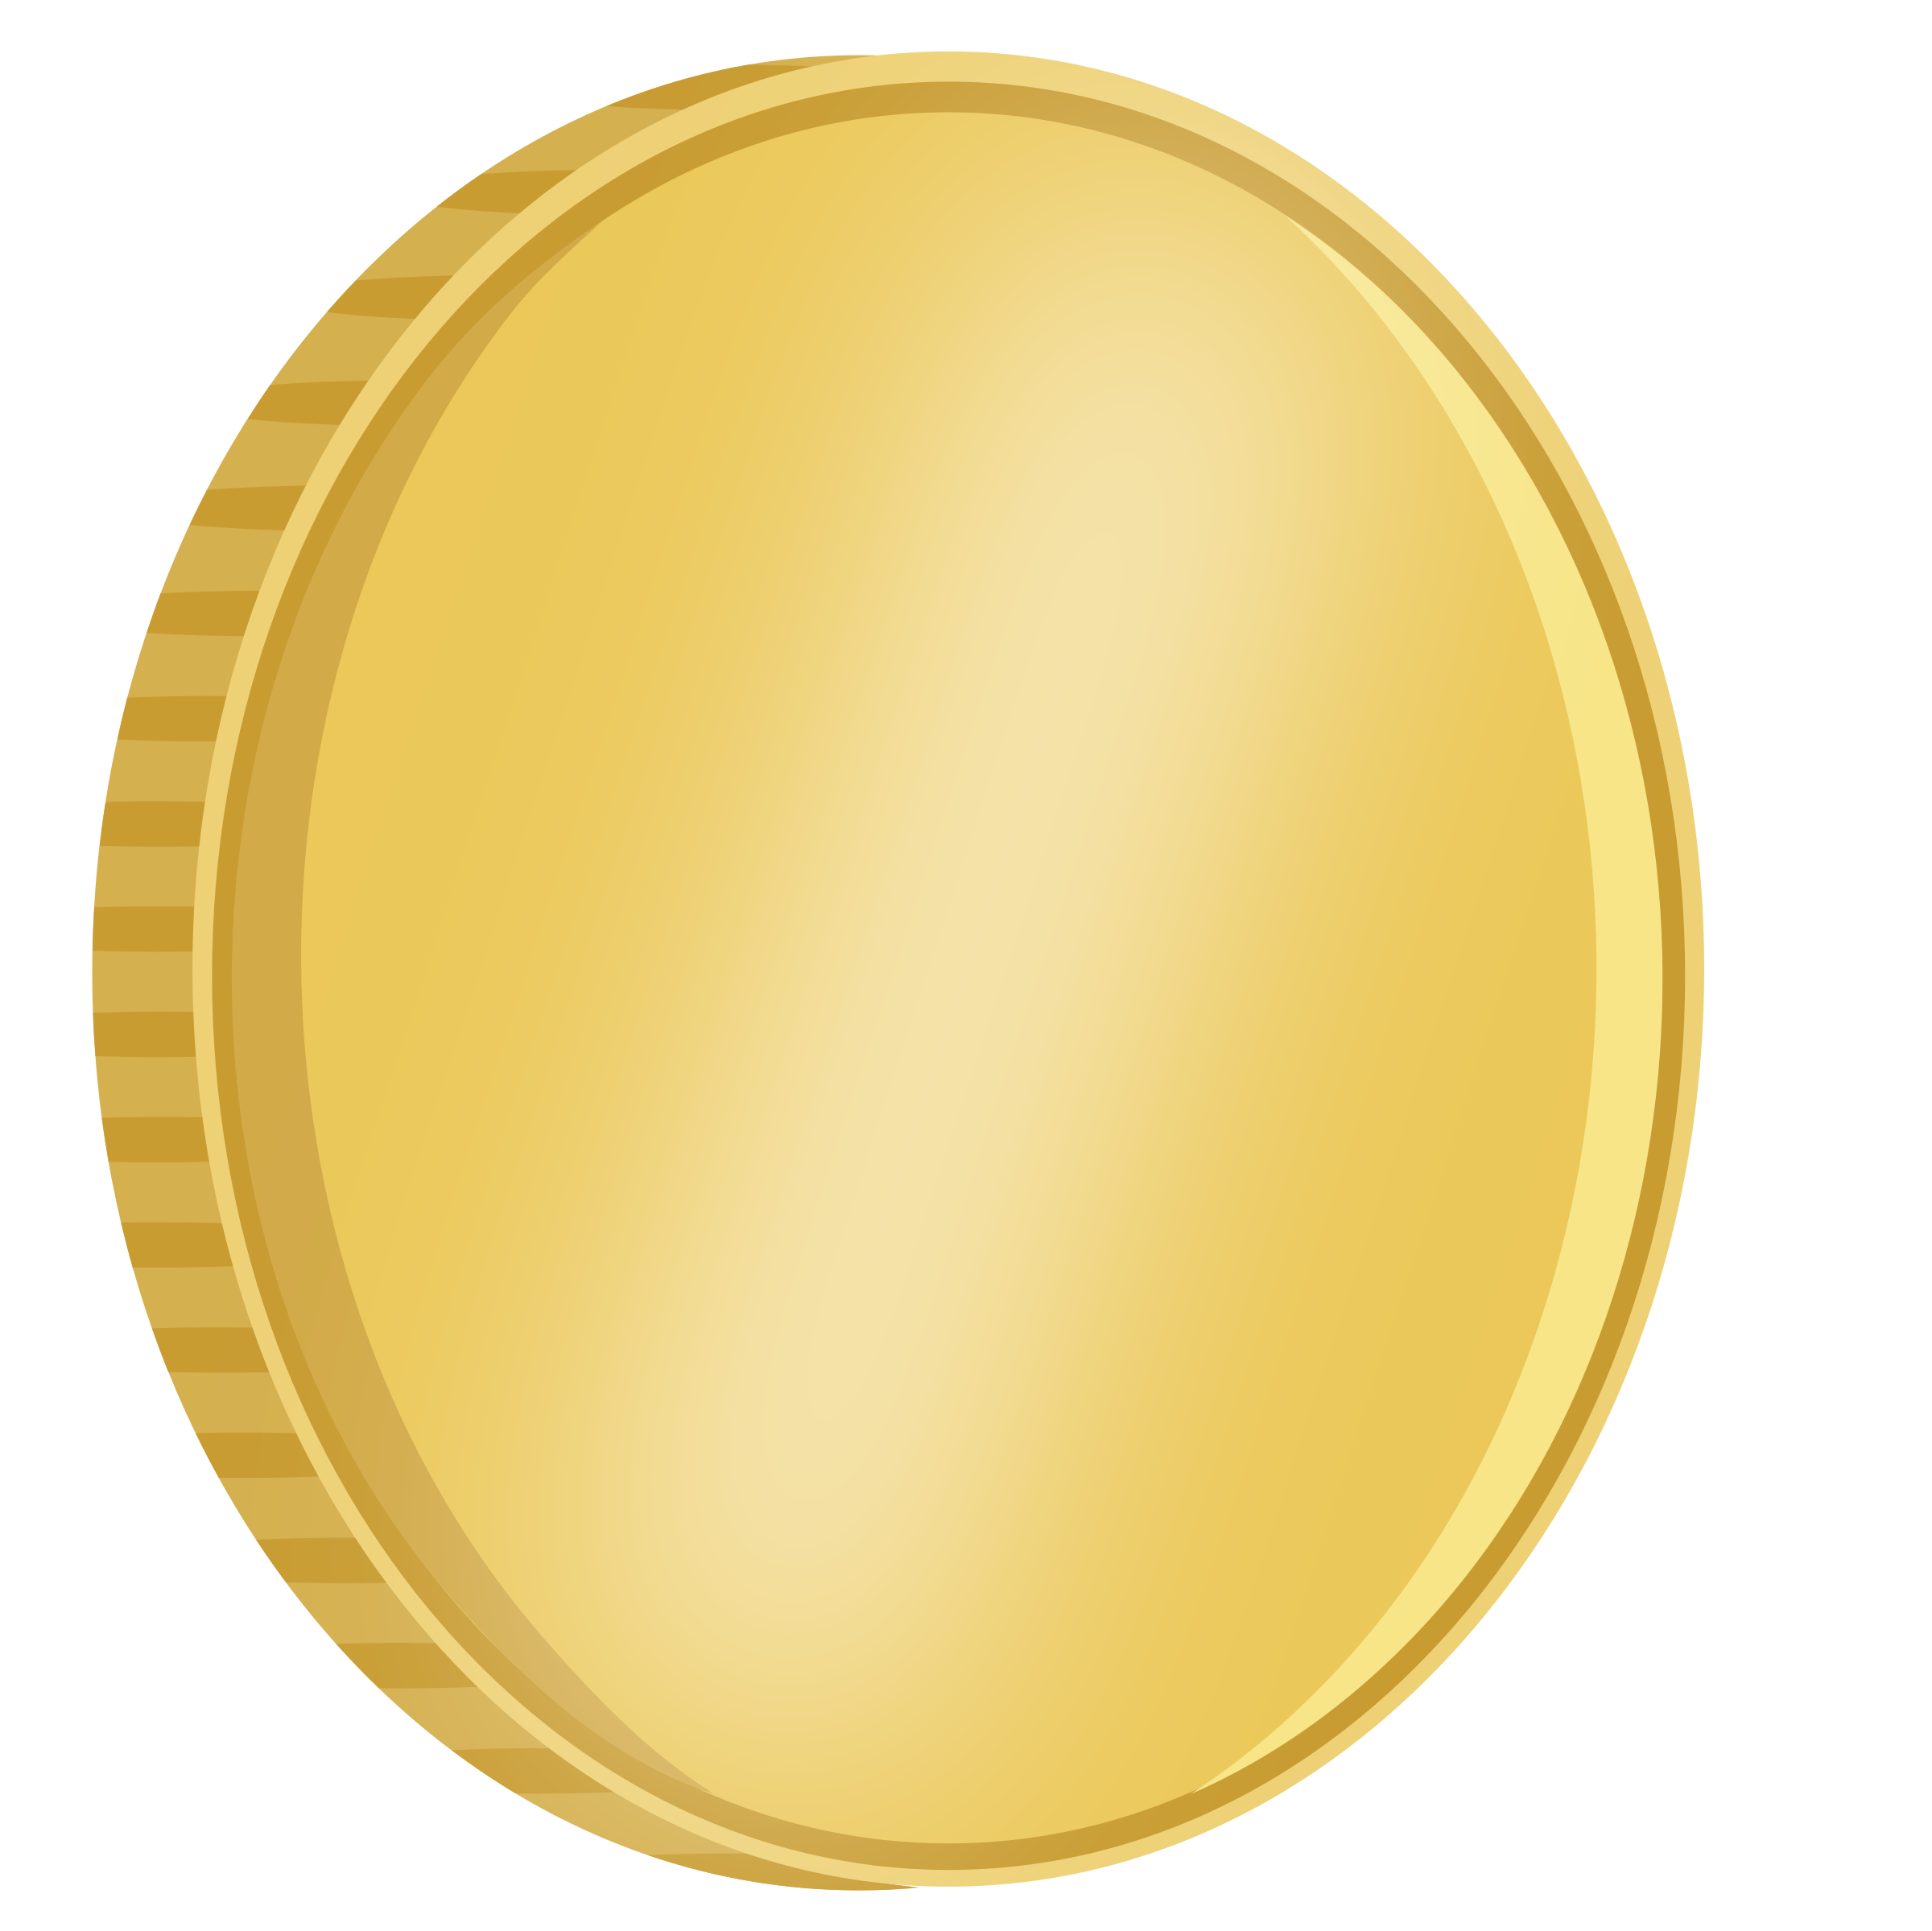 Gold Coin Png Image   Coin Hd Png - Coins, Transparent background PNG HD thumbnail